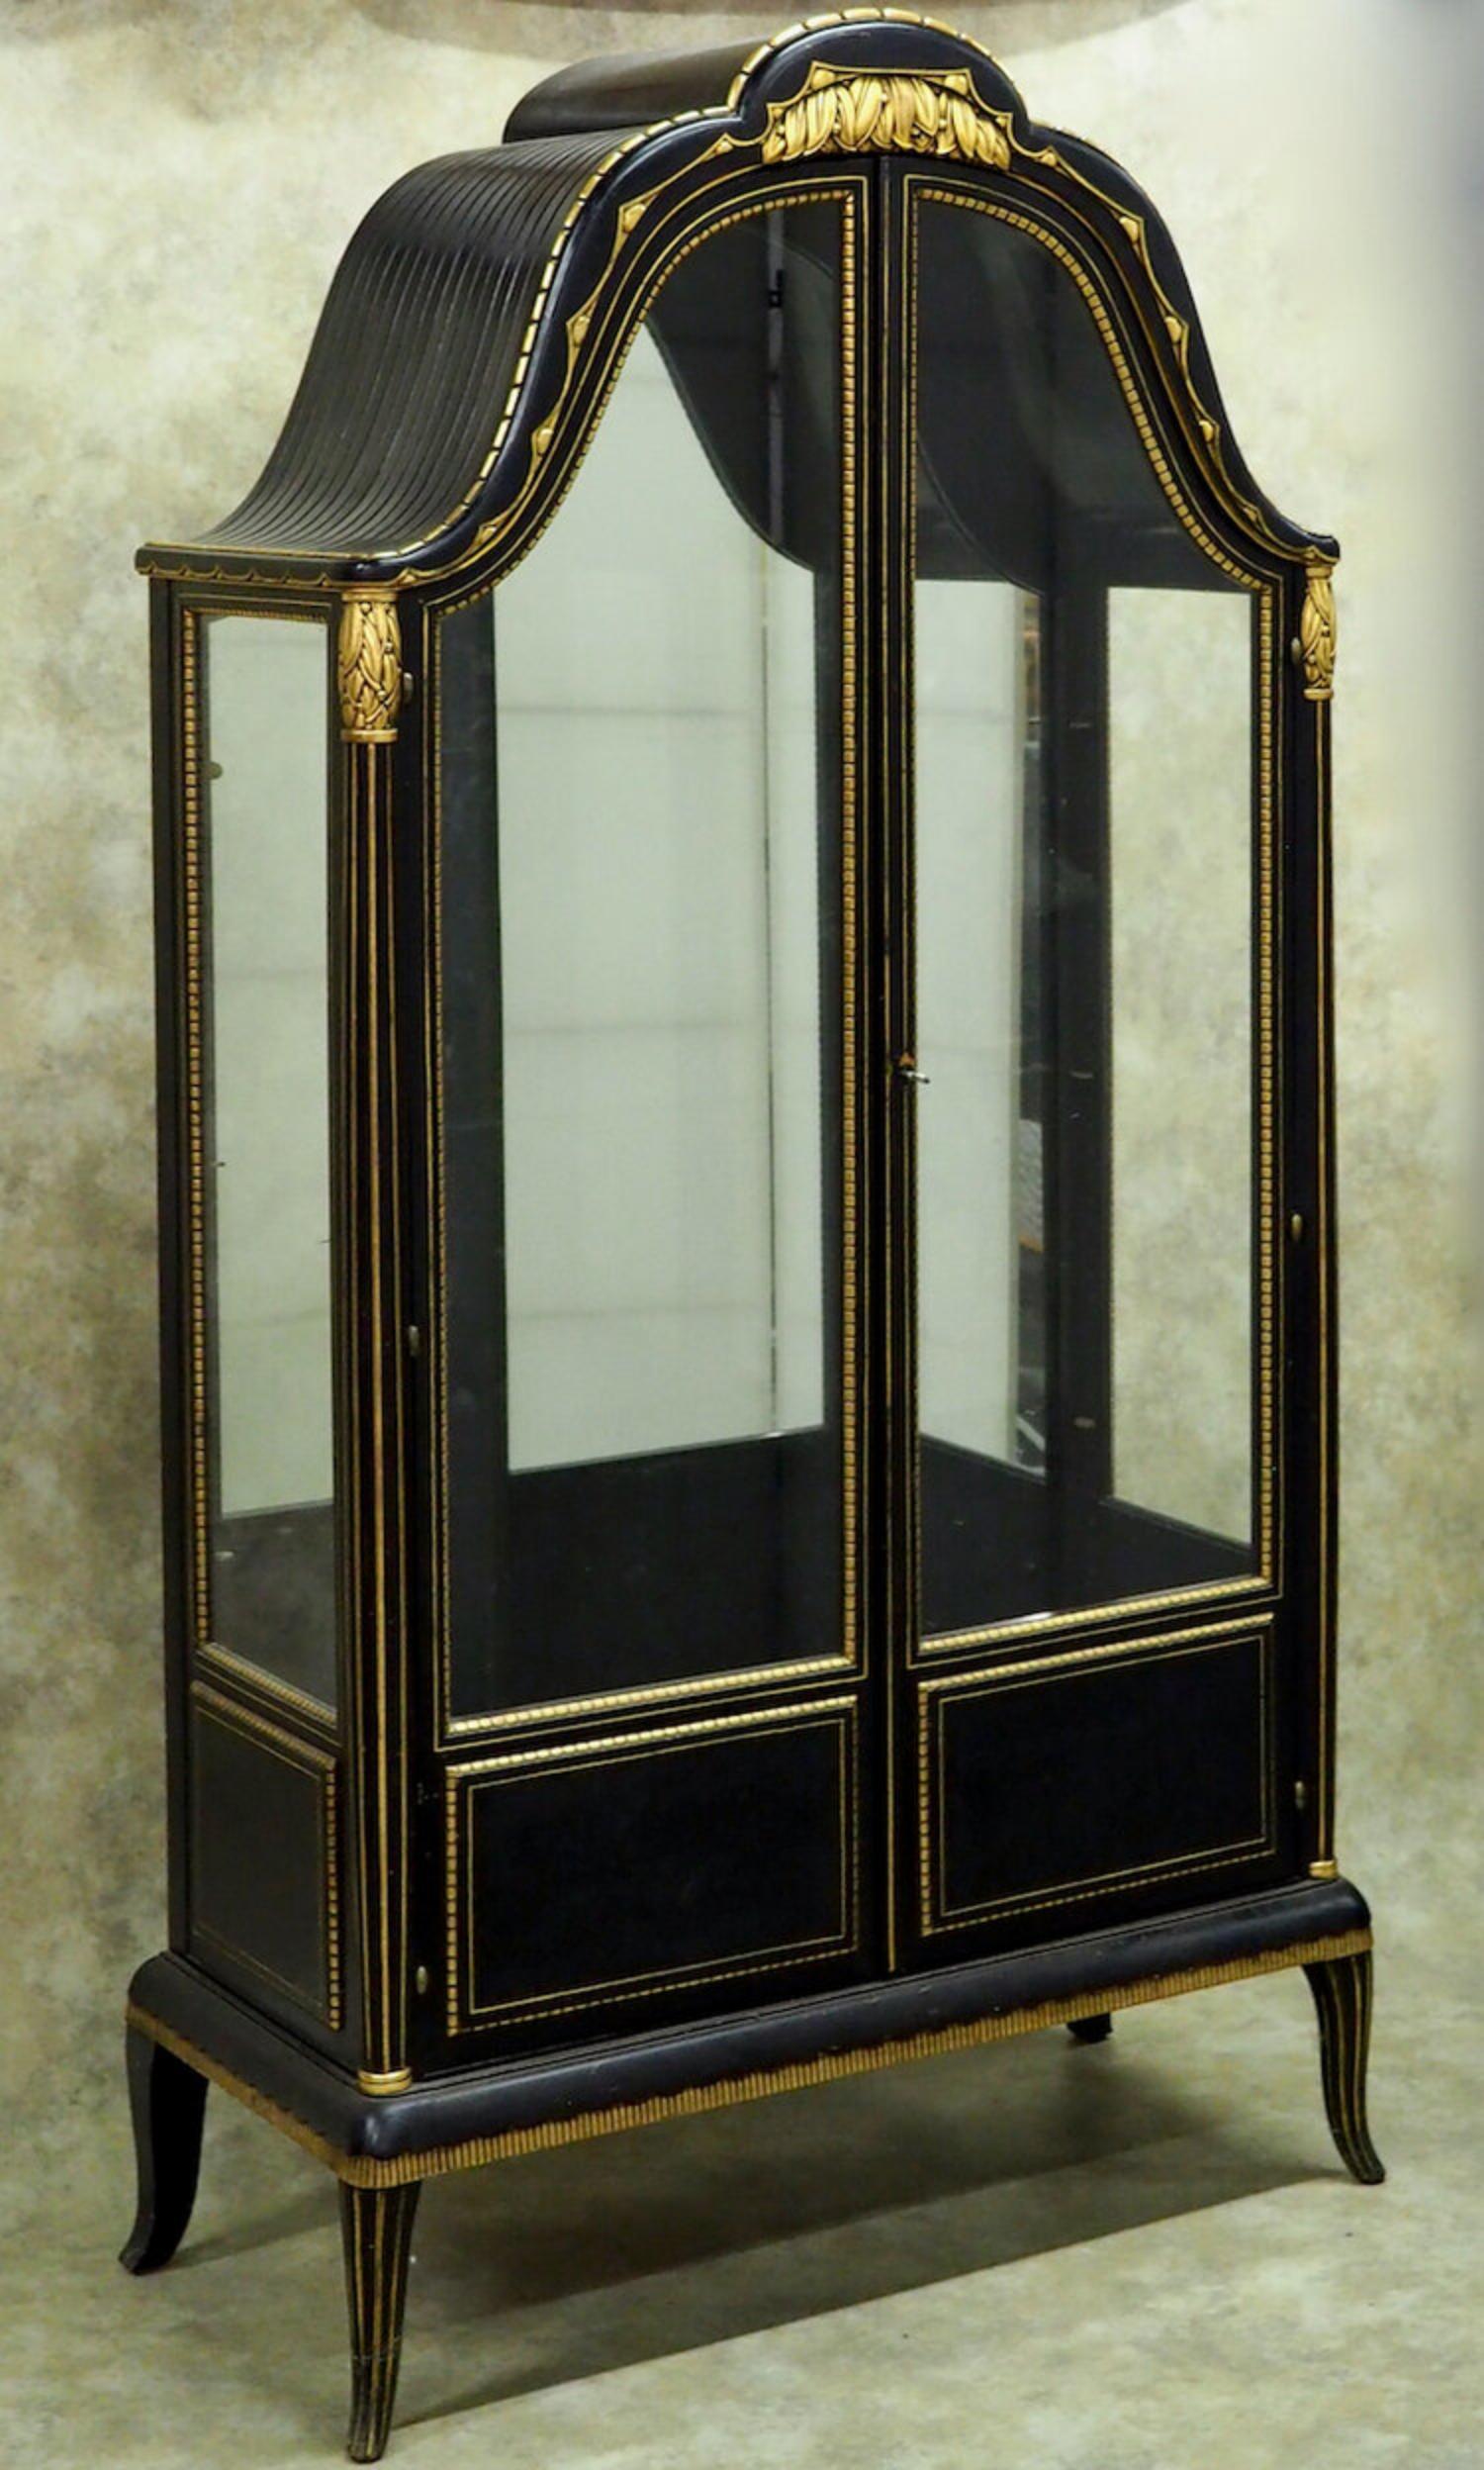 Early Classic Art Deco display cabinet/vitrine by Paul Follot, circa 1918, in original blue/black lacquer and with original gilding. This exquisite cabinet is a masterpiece of sculpting and detail in exceptional original condition. 40” wide x 18”